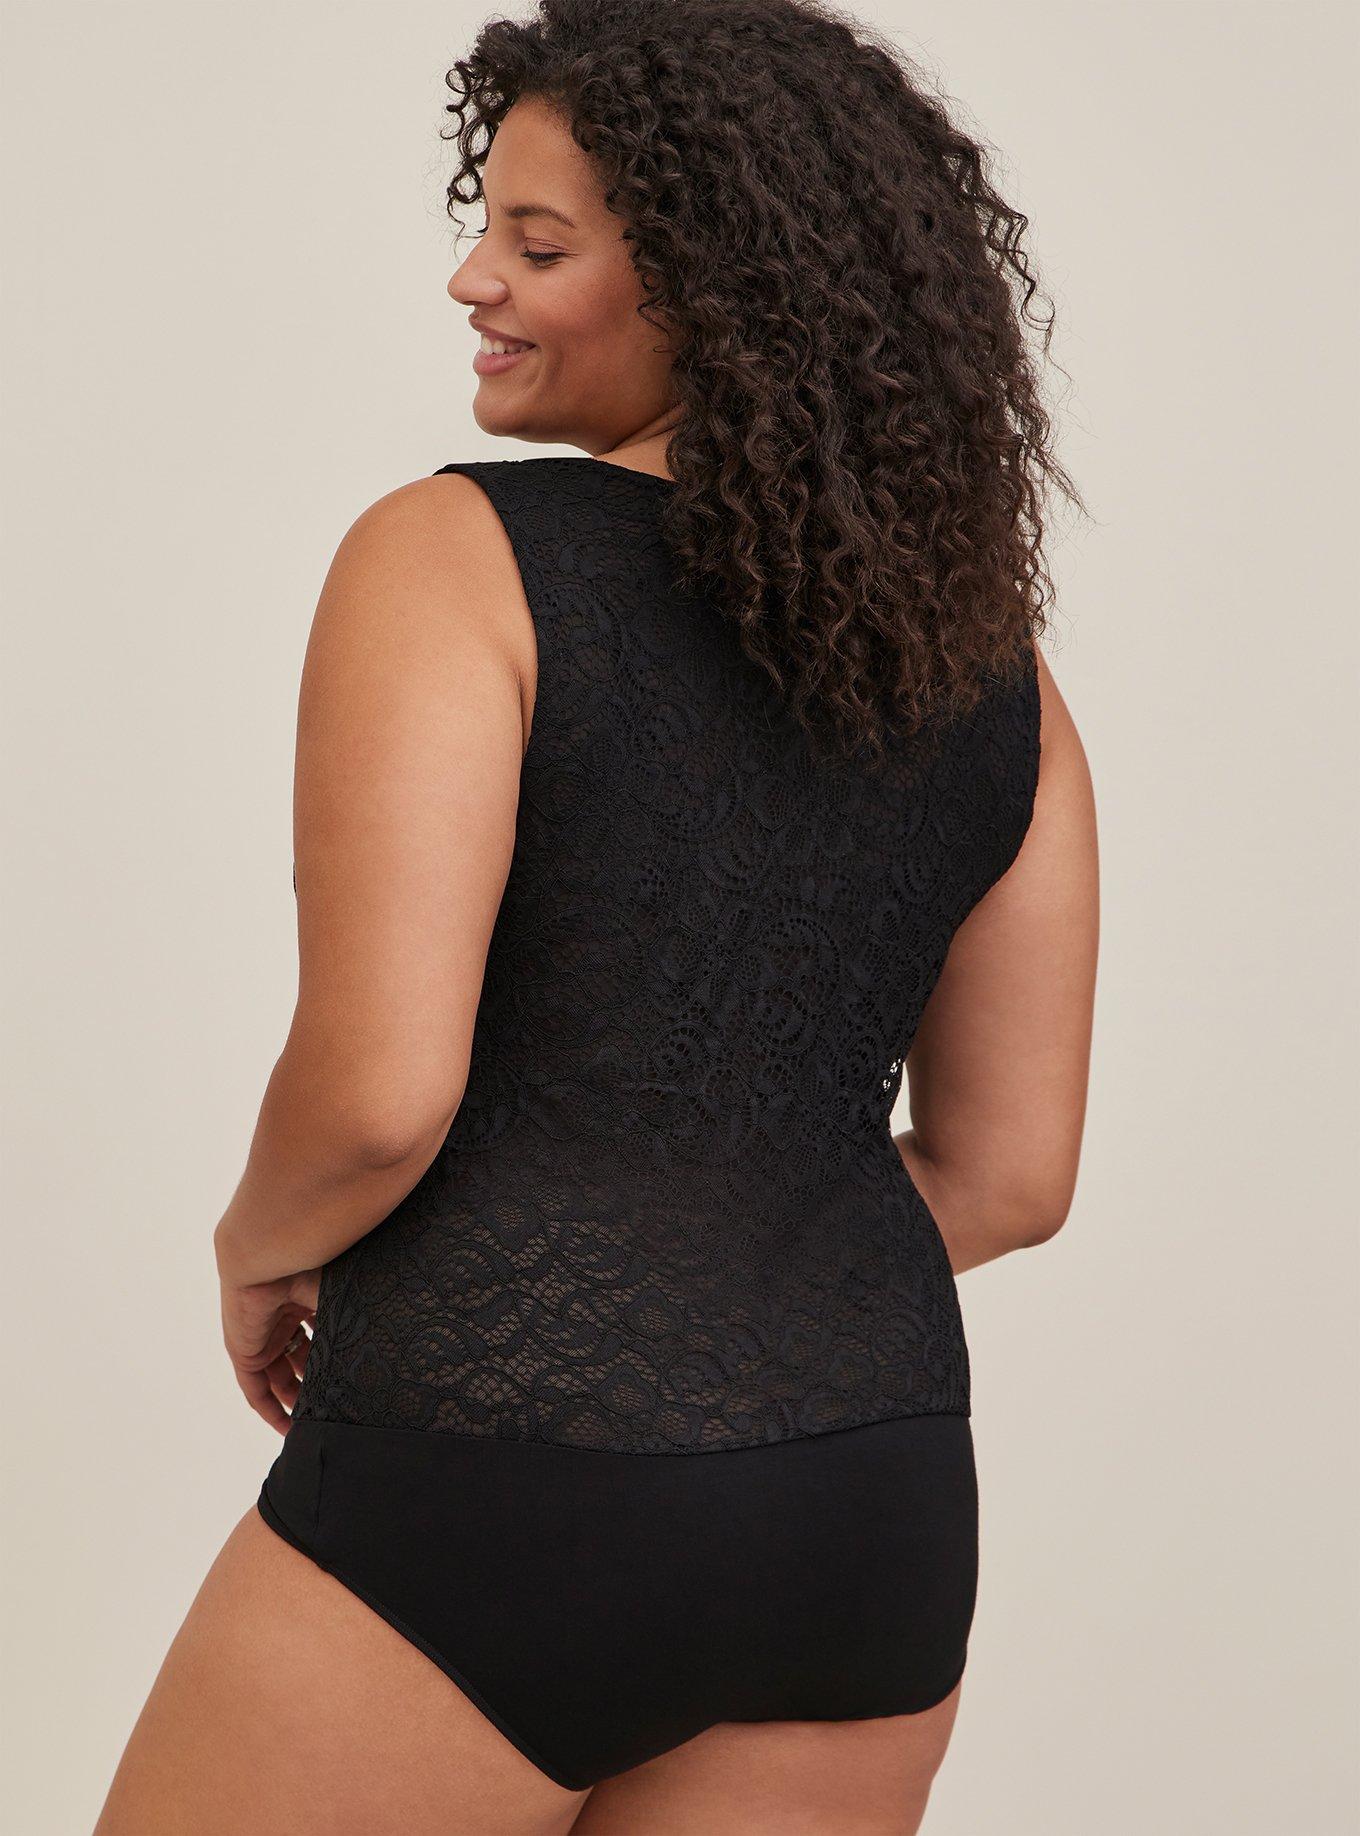 Lace Body  15 Black Lace Bodysuits to Wear From the Bar to the